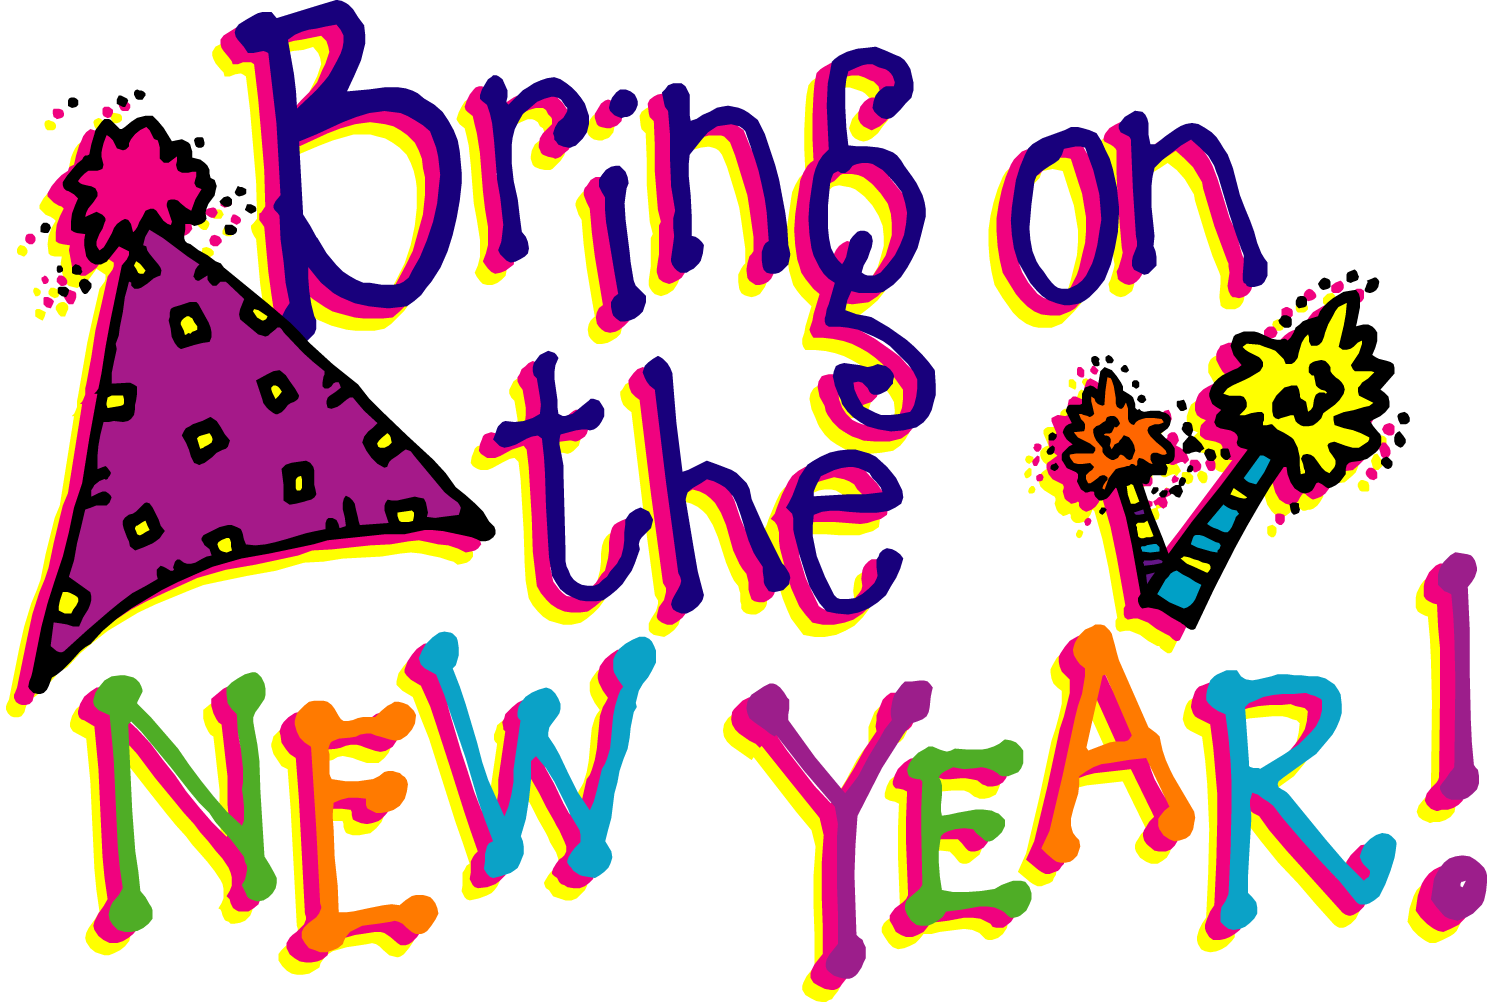 Happy new year clipart free .